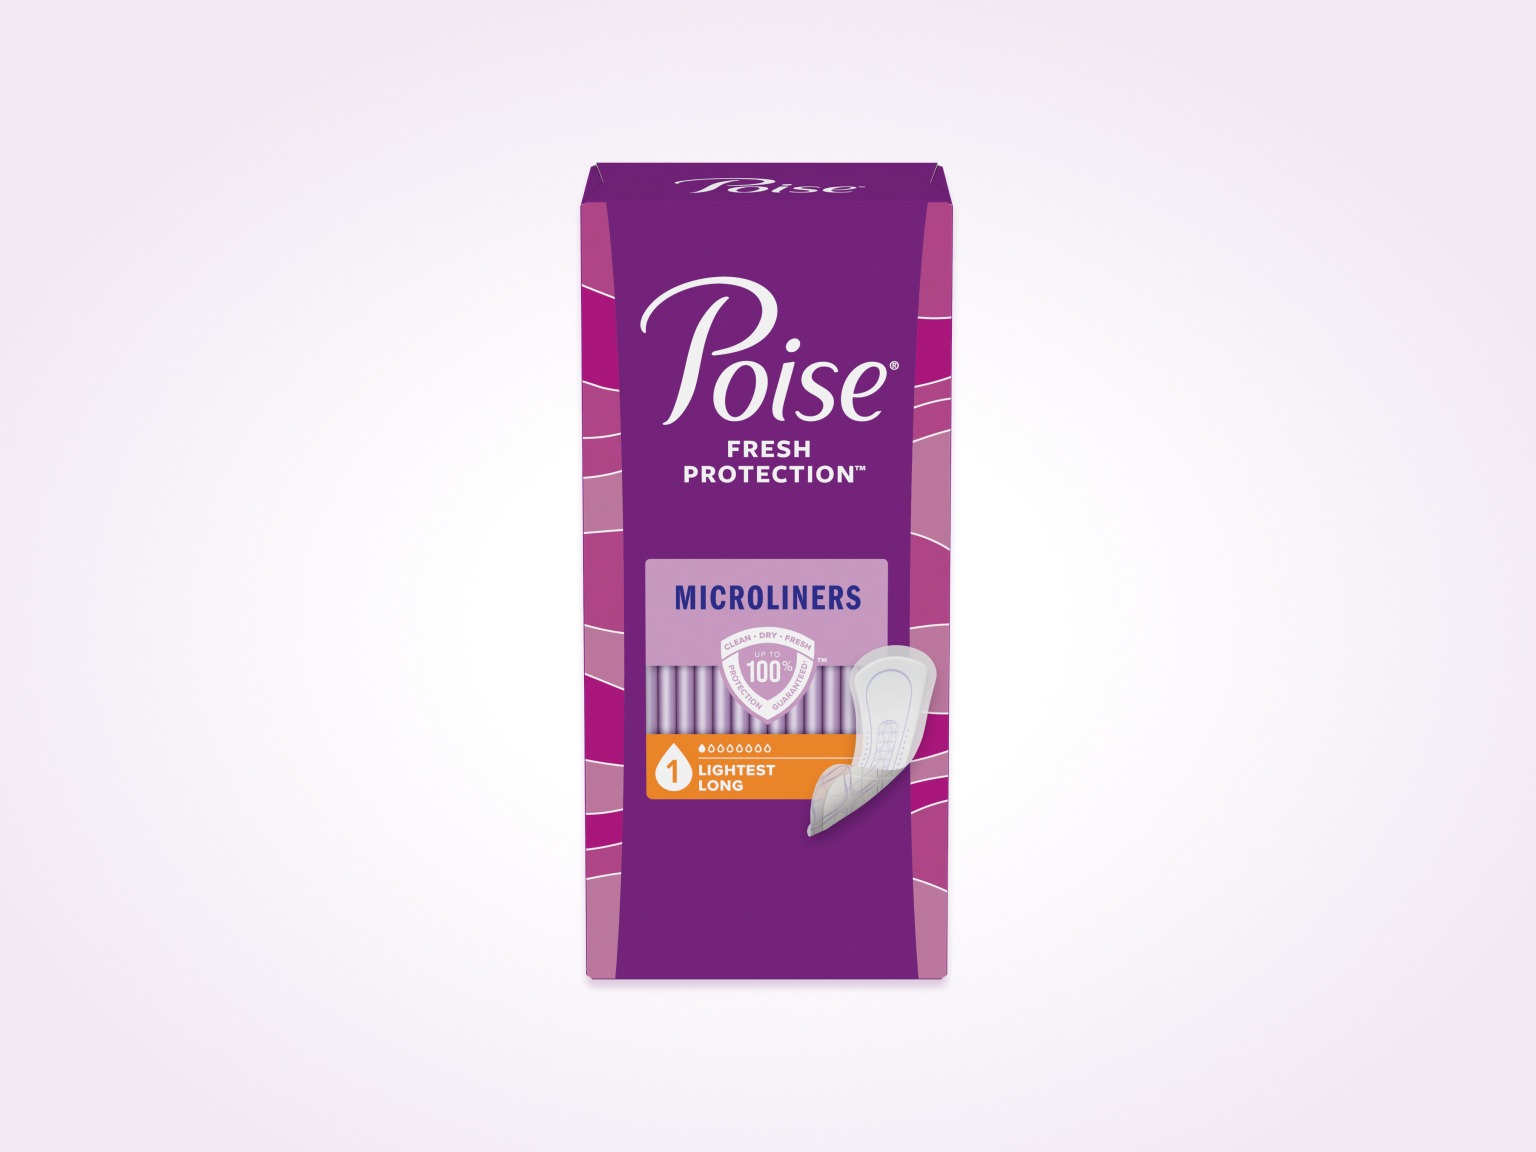 Poise Incontinence Microliners For Women, Lightest Absorbency, Long, 50Ct